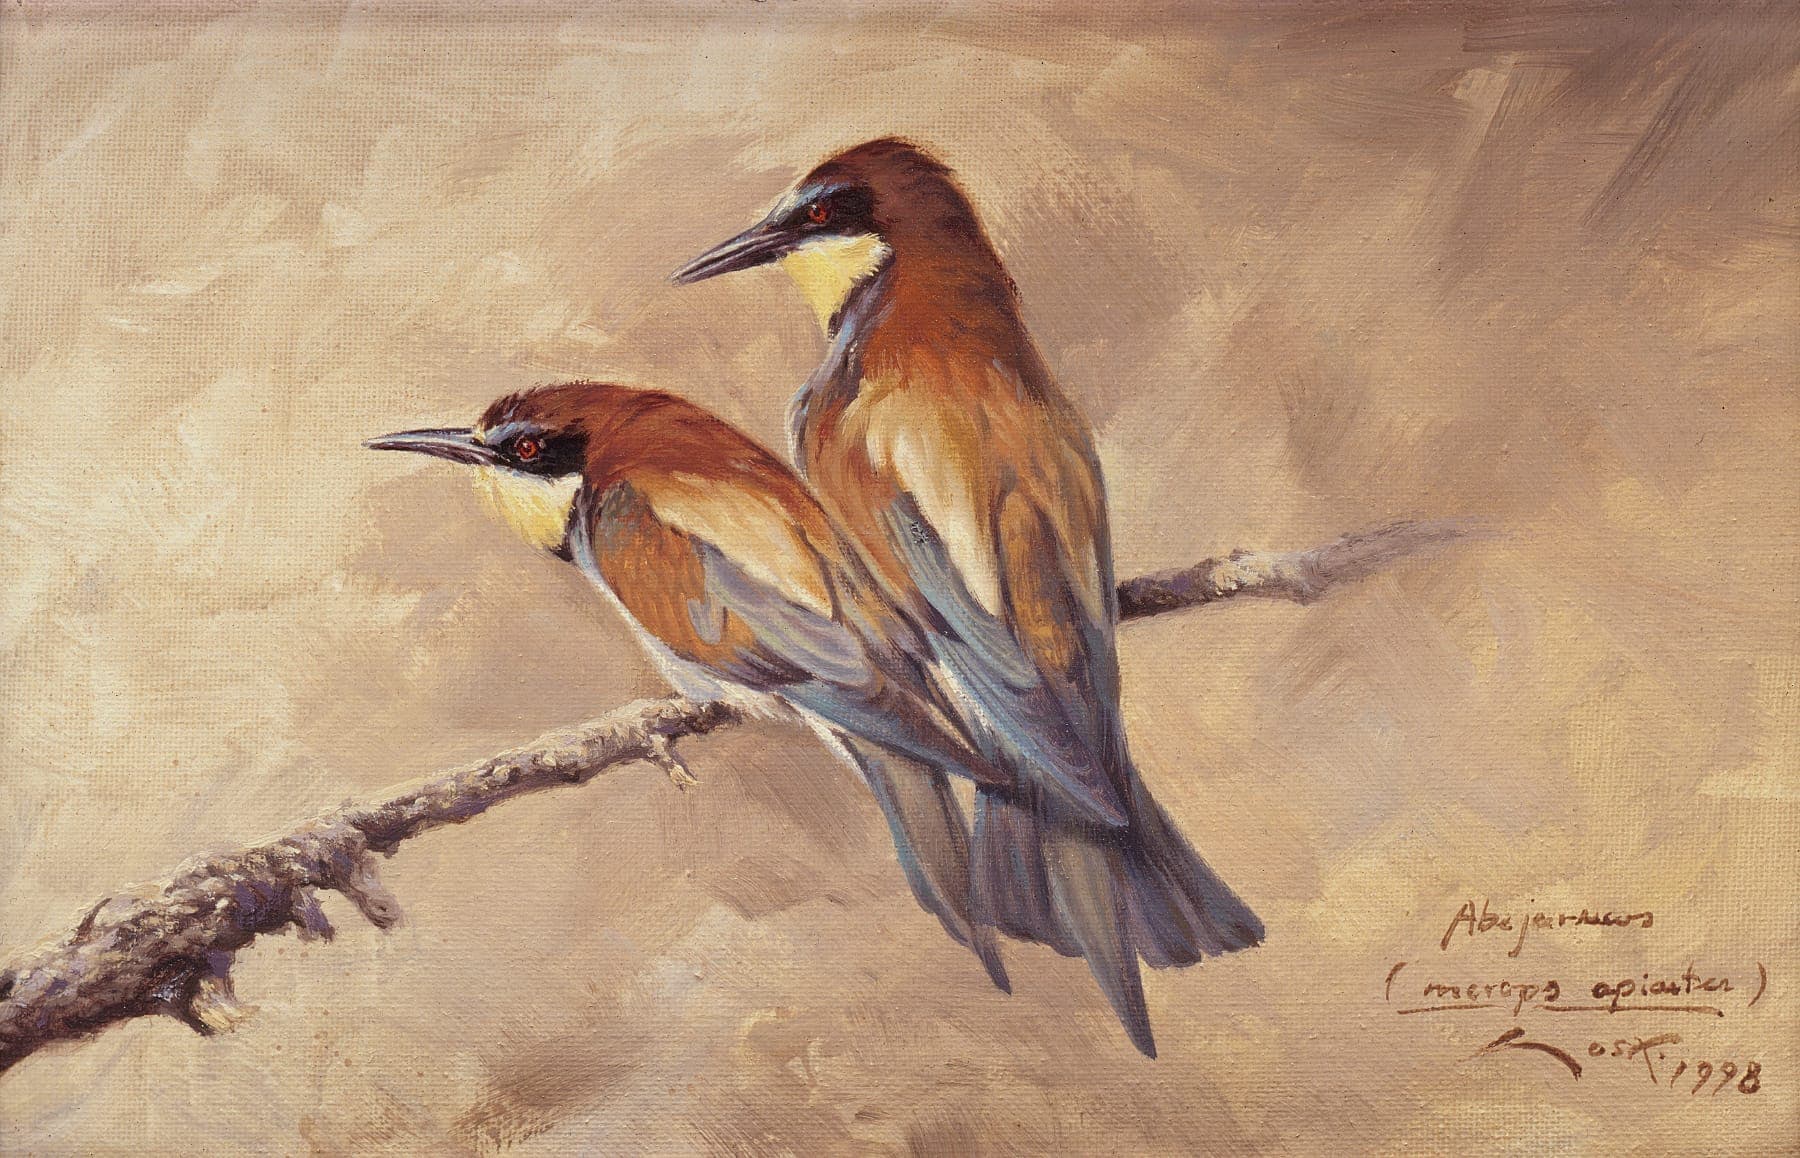 Bee eater (Merops apiaster) painting